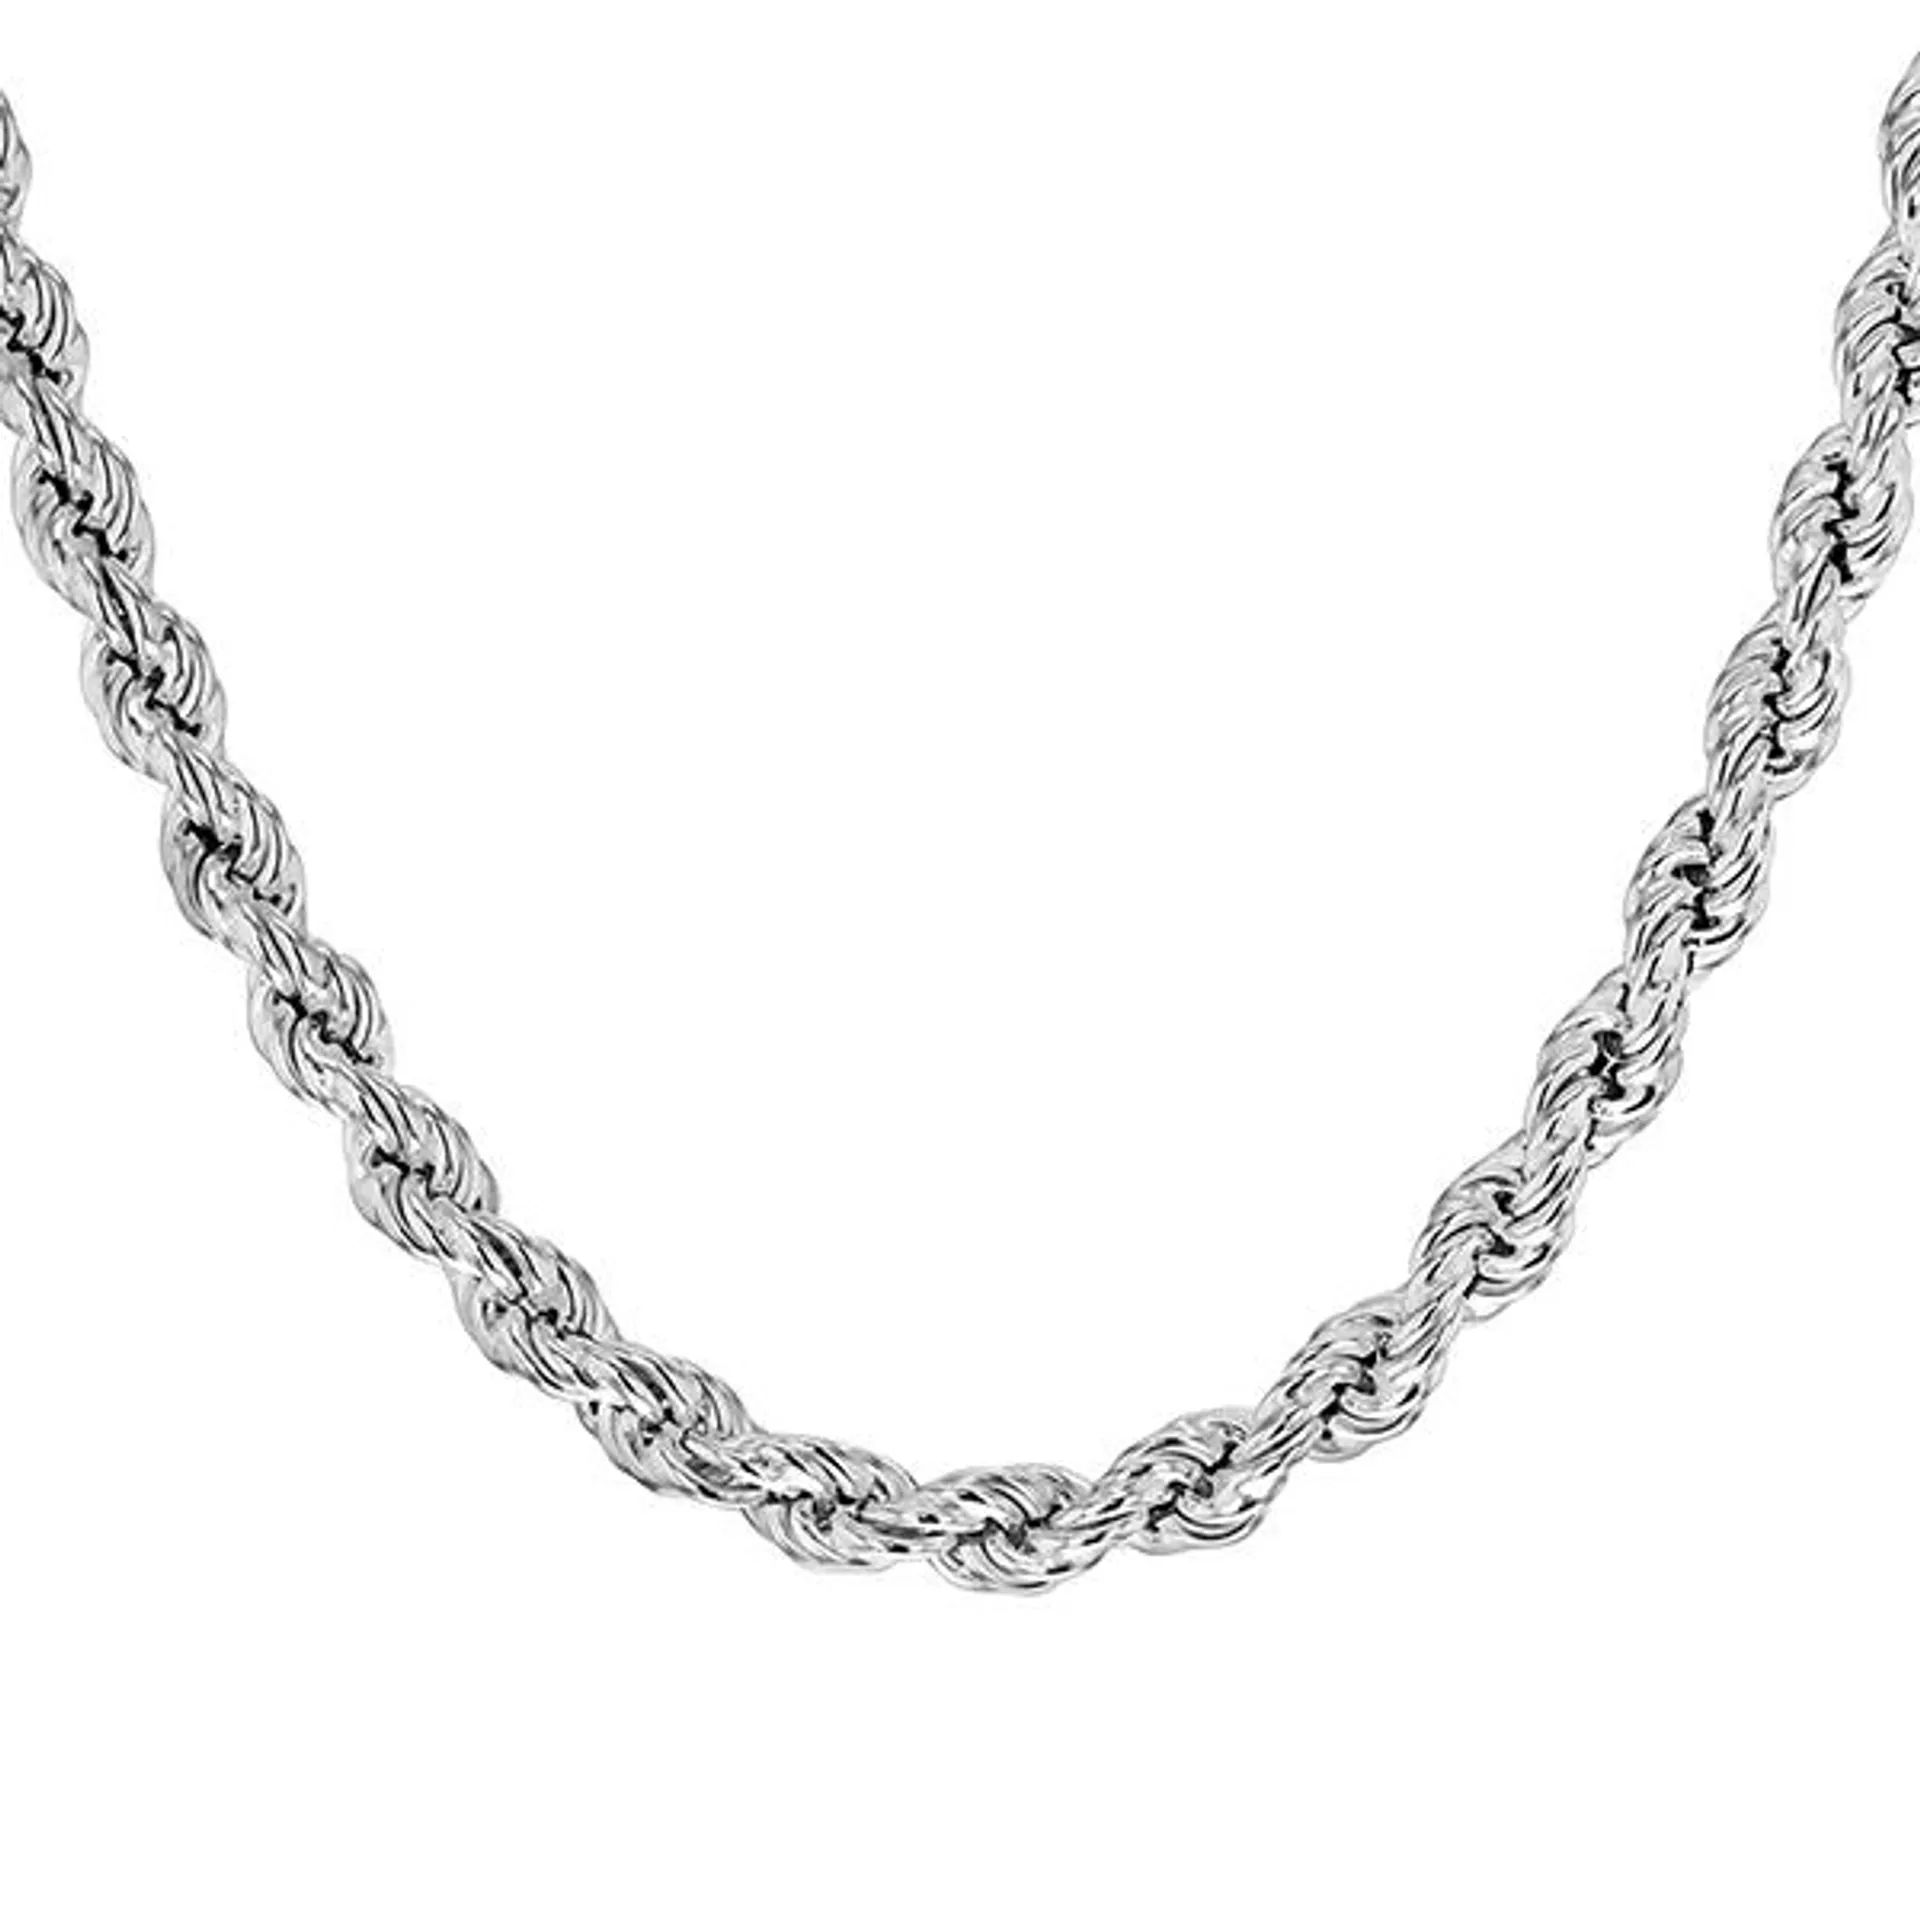 Faith & Brown Italian Crafted 4.2mm Rope Sterling Silver Necklace - 30 inch